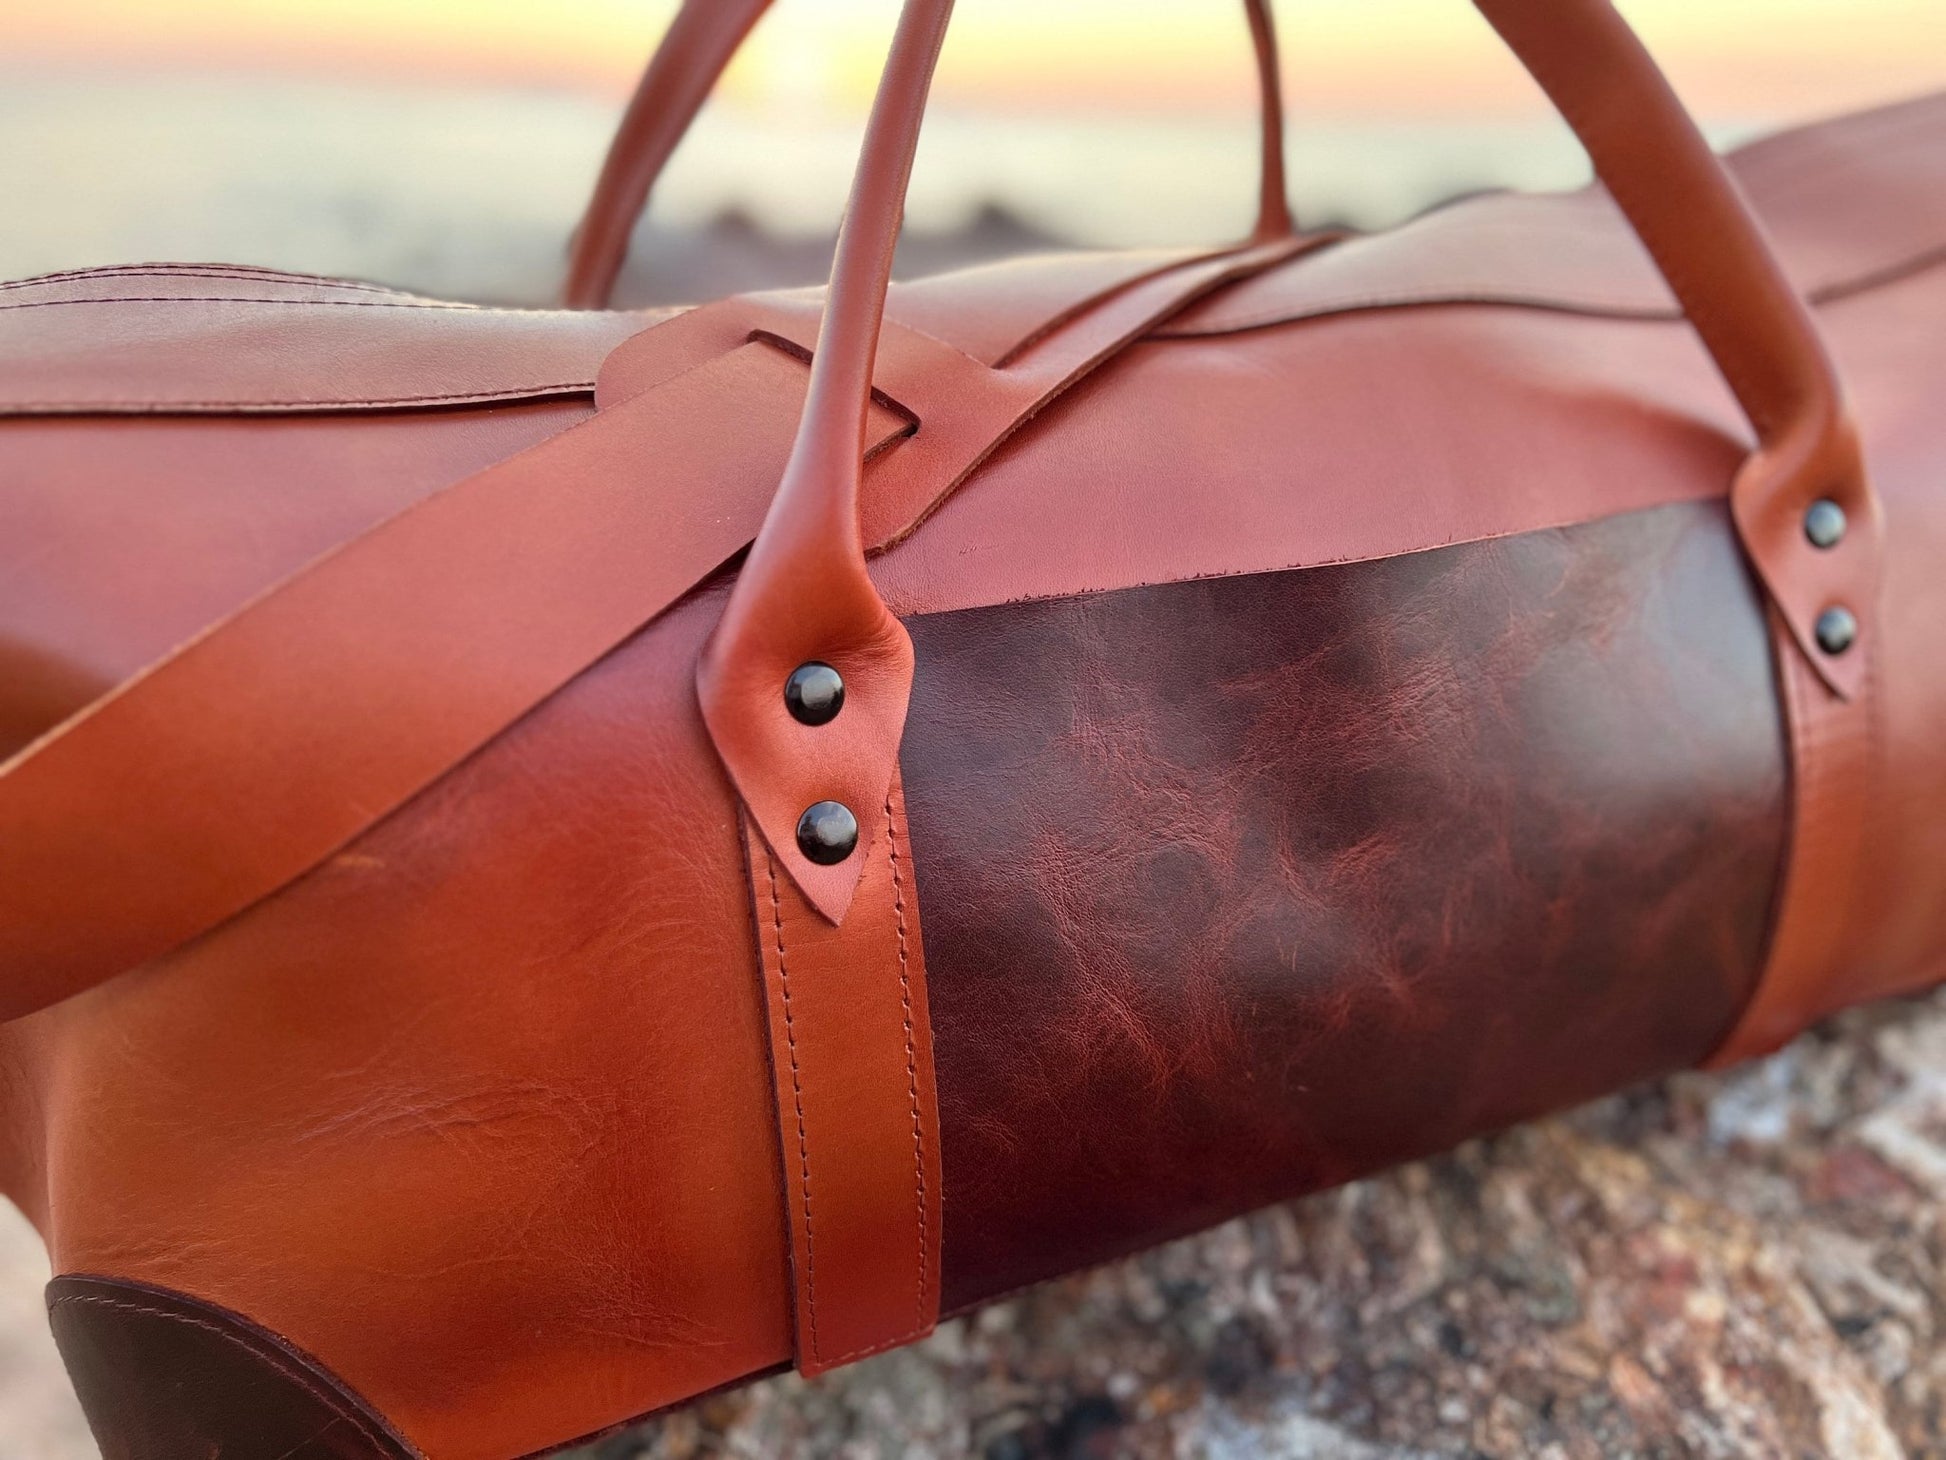 High Quality Leather Duffle Bag — The Handmade Store